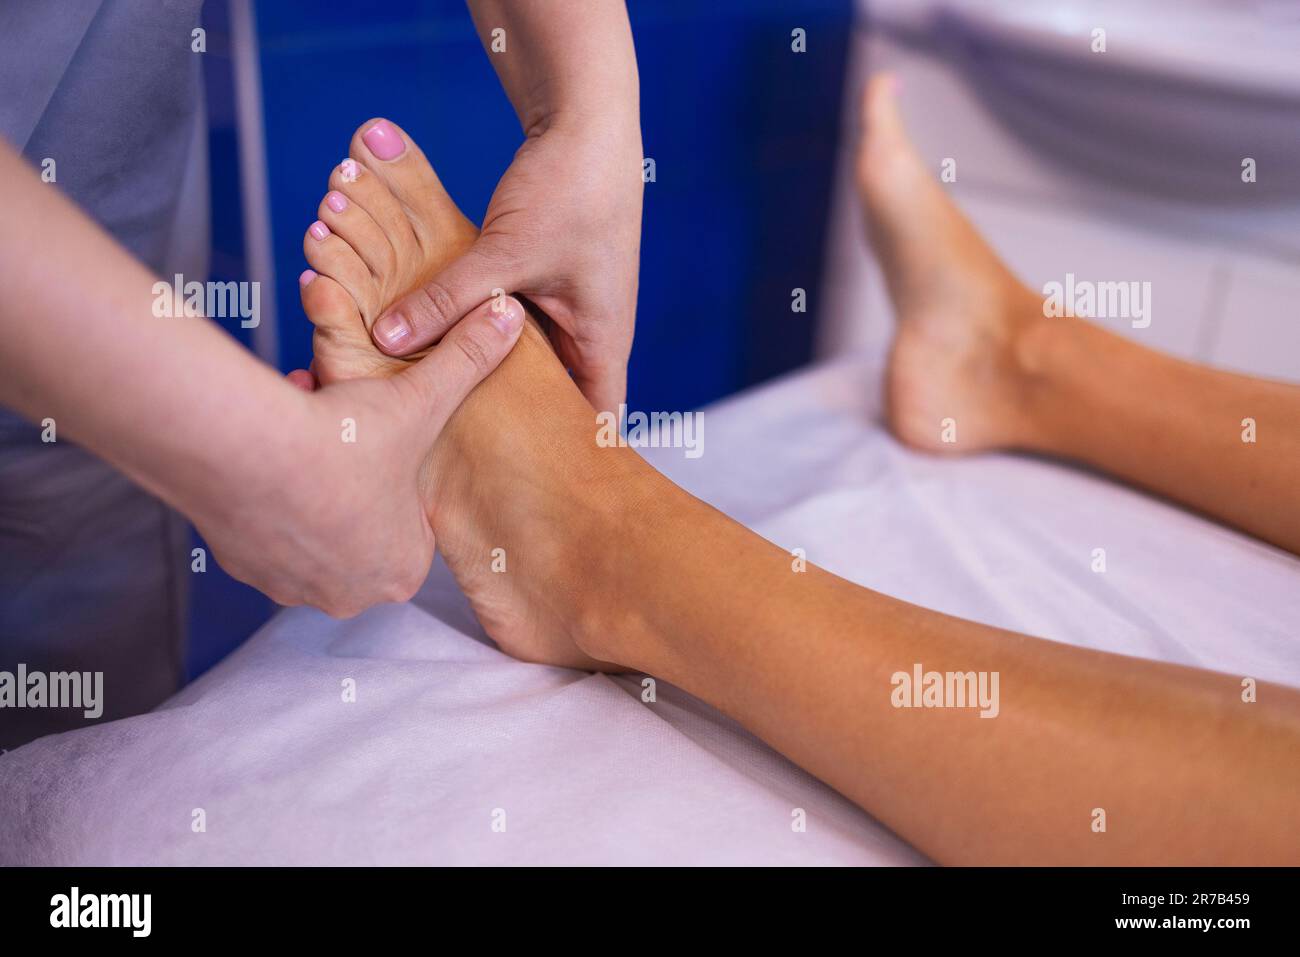 Close up of female foot getting gentle massage. Masseuse holds woman leg in her hands. Young client lies and enjoys relaxing procedure in beauty salon Stock Photo